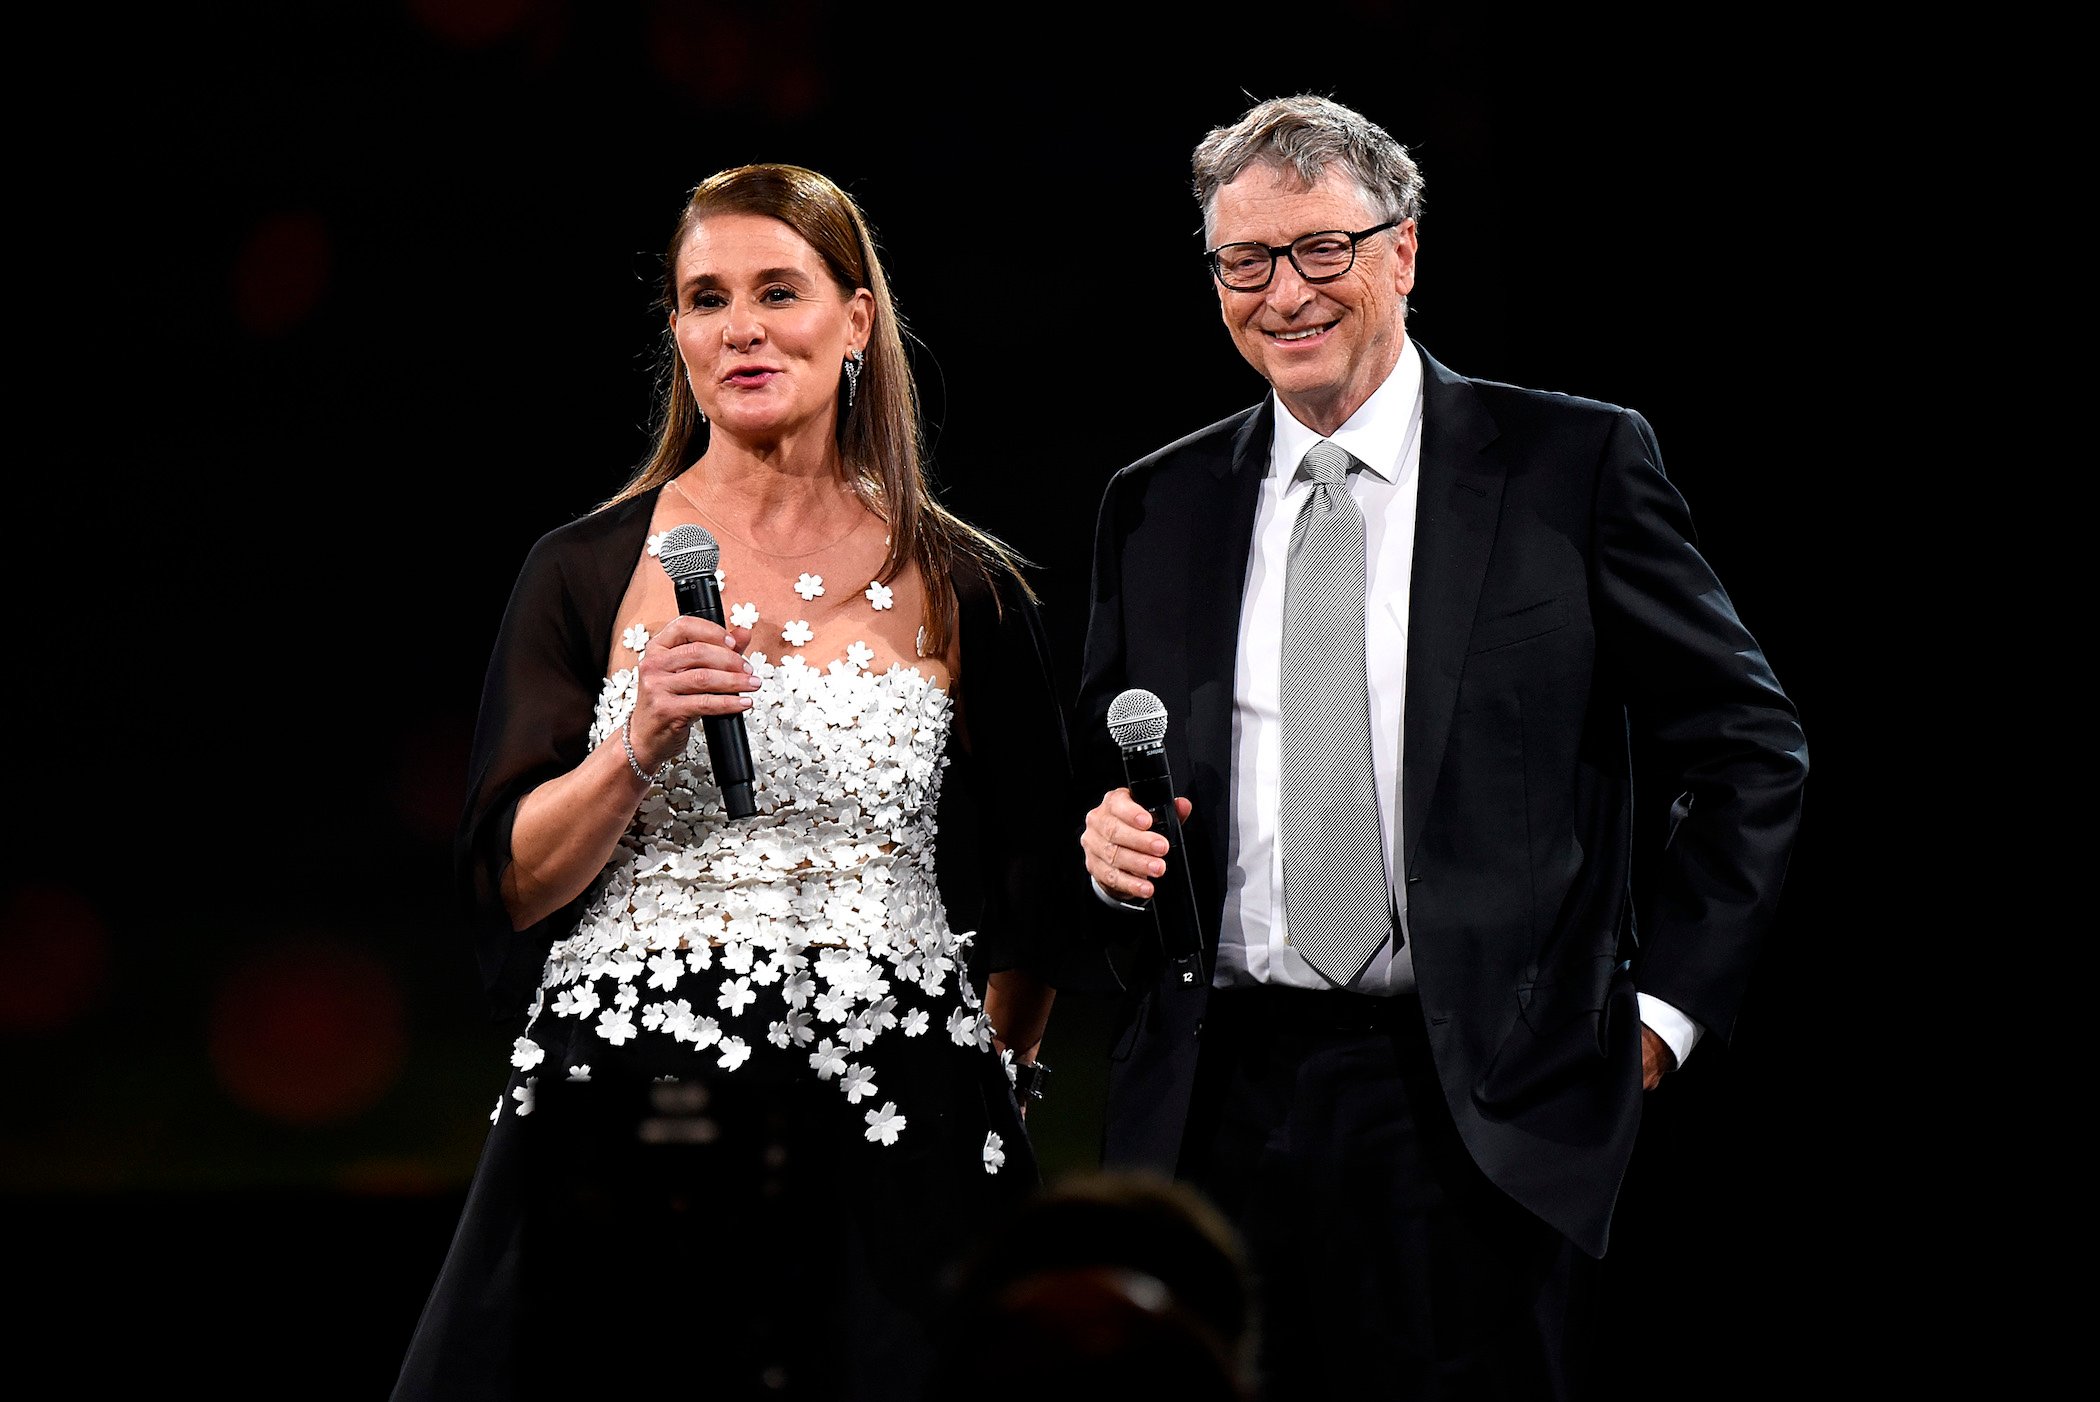 Melinda Gates and Bill Gates speaking to a crowd against a black background